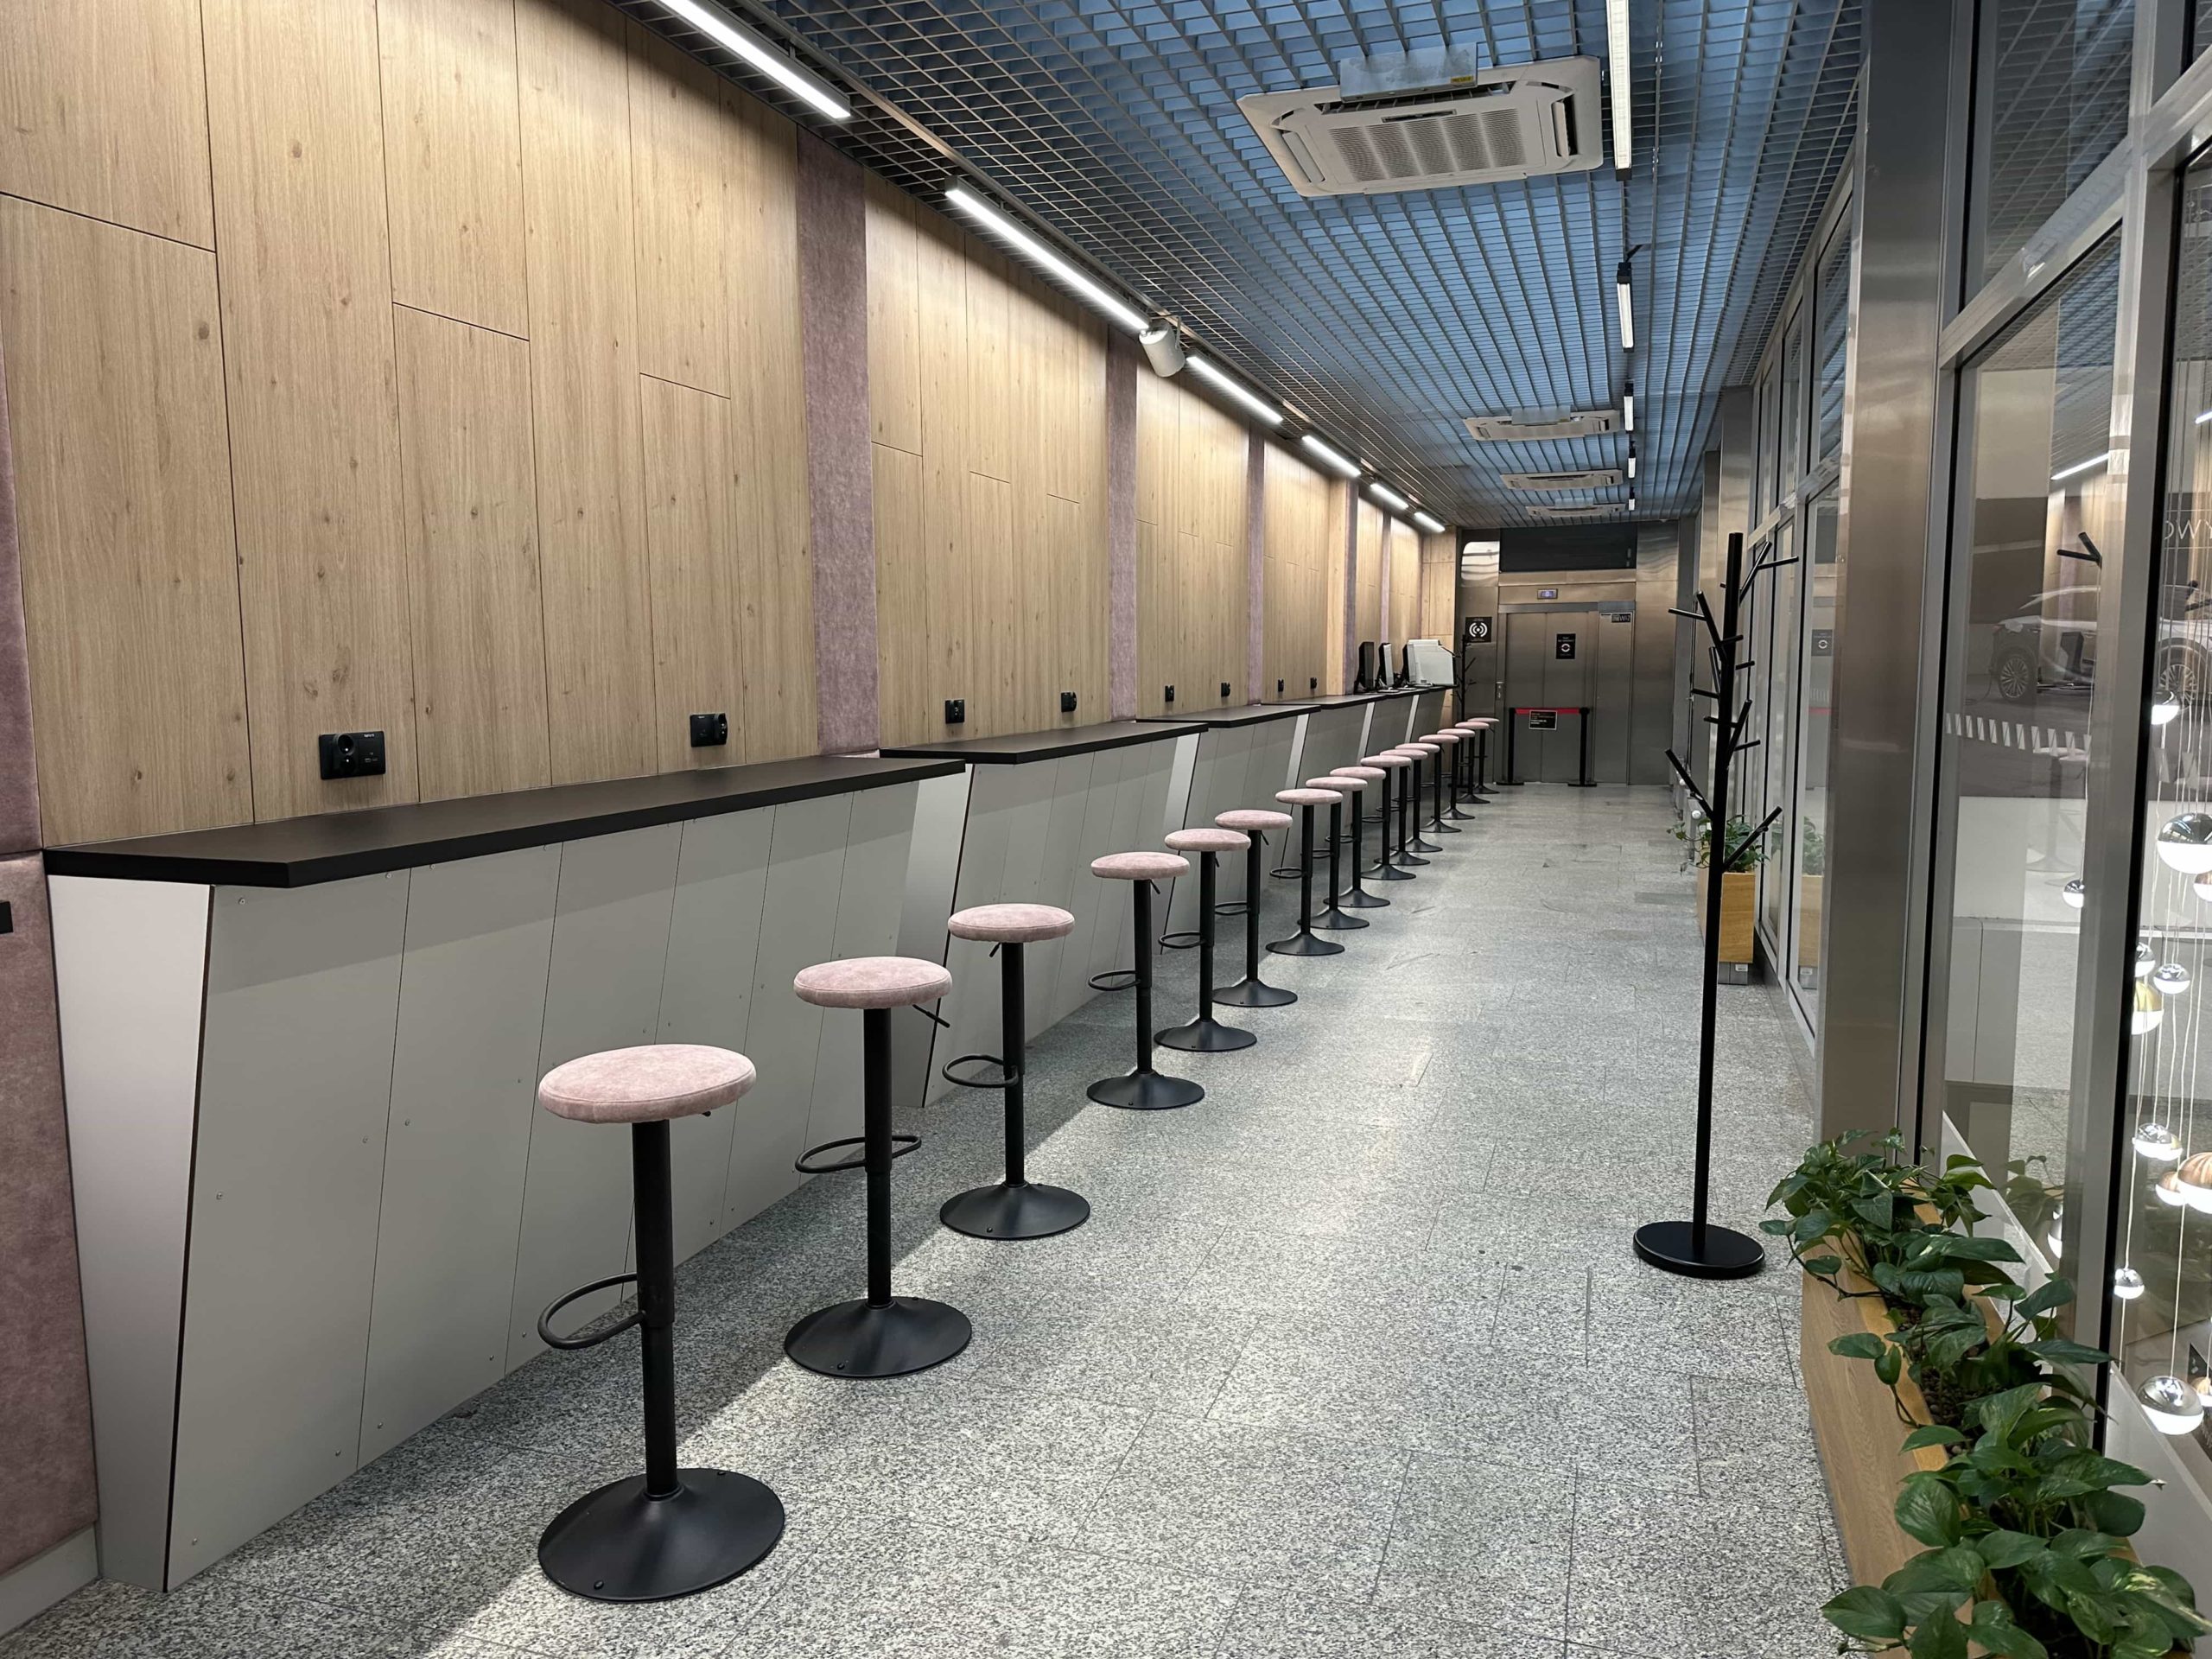 A long line of bar stools along a raised workstation area